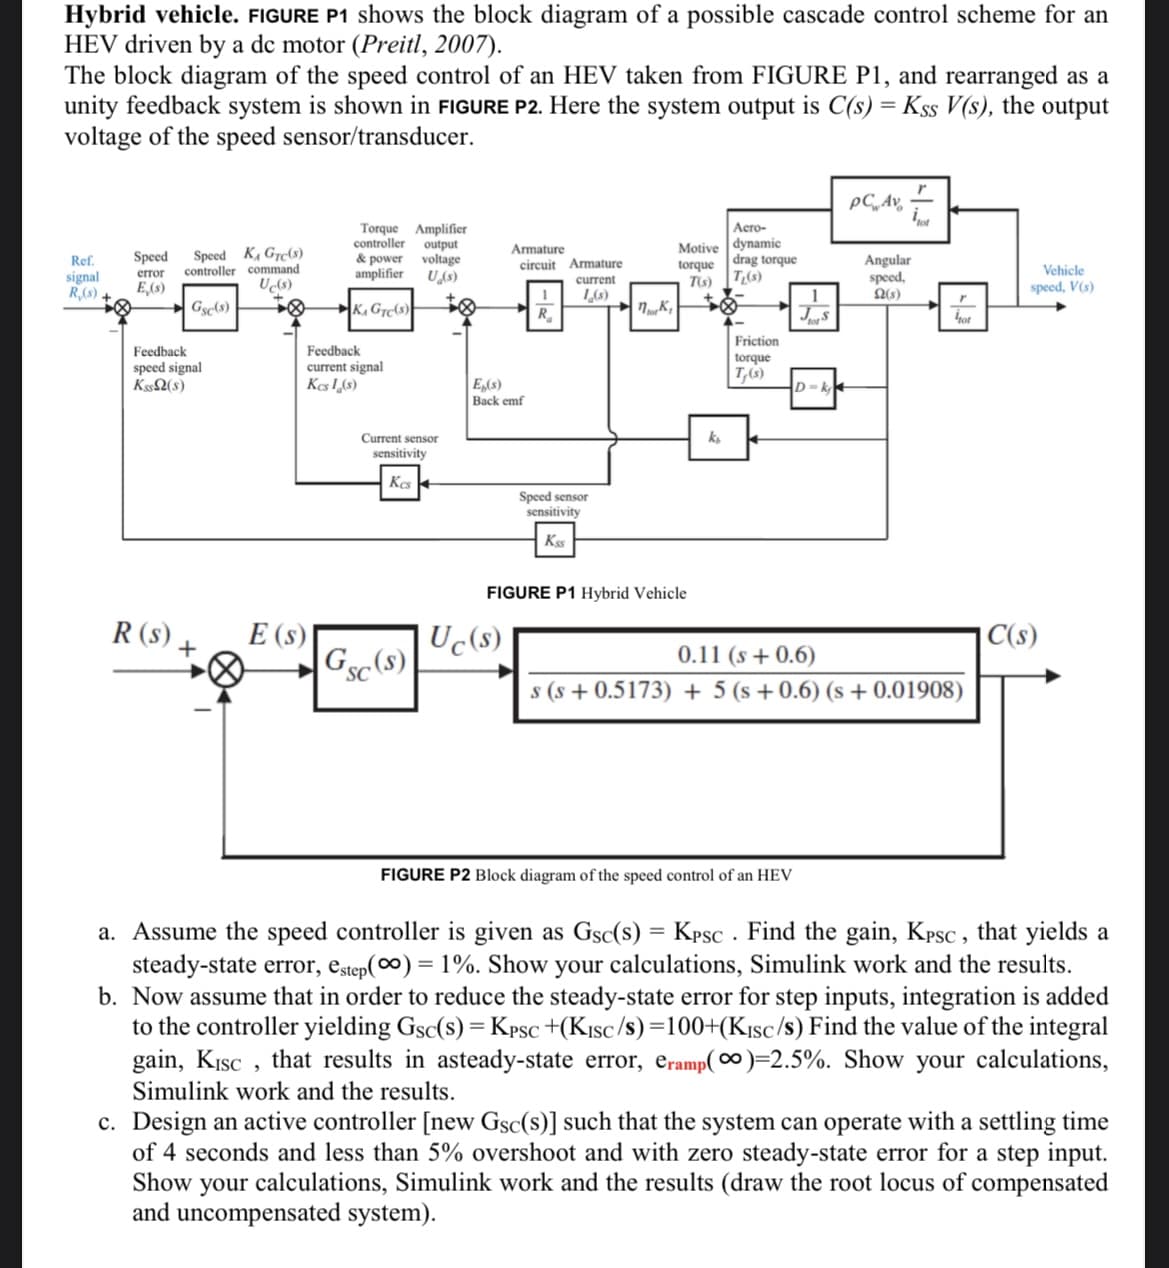 Hybrid vehicle. FIGURE P1 shows the block diagram of a possible cascade control scheme for an
HEV driven by a dc motor (Preitl, 2007).
The block diagram of the speed control of an HEV taken from FIGURE P1, and rearranged as a
unity feedback system is shown in FIGURE P2. Here the system output is C(s) = Kss V(s), the output
voltage of the speed sensor/transducer.
pC, Av,-
Speed K, Gre(s)
controller command
Torque Amplifier
controller output
& power voltage
amplifier
Acro-
Motive dynamie
Armature
Speed
|drag torque
Angular
speed,
Ref.
circuit Armature
torque
Vehicle
signal
R,(s).
error
U(s)
T(s)T,(s)
current
E,(s)
speed, V(s)
Gse(s)
K, Grc(s)
R.
tot
Friction
Feedback
speed signal
Kss2(s)
Feedback
torque
current signal
Kes I(S)
T,(s)
E,(s)
Back emf
D=k
ks
Current sensor
sensitivity
Kcs
Speed sensor
sensitivity
Kss
FIGURE P1 Hybrid Vehicle
R (s),
E (s)
Uc(s)
|C(s)
+
Gsc(s)
0.11 (s + 0.6)
SC
s (s + 0.5173) + 5 (s + 0.6) (s + 0.01908)
URE P2 Block diagram of the speed control of an HEV
a. Assume the speed controller is given as Gsc(s) = Kpsc . Find the gain, Kpsc , that yields a
steady-state error, estep(∞) = 1%. Show your calculations, Simulink work and the results.
b. Now assume that in order to reduce the steady-state error for step inputs, integration is added
to the controller yielding Gsc(s) = Kpsc +(K1sc/s)=100+(K1sc/s) Find the value of the integral
gain, Kısc , that results in asteady-state error, eramp( 0)=2.5%. Show your calculations,
%3D
Simulink work and the results.
c. Design an active controller [new Gsc(s)] such that the system can operate with a settling time
of 4 seconds and less than 5% overshoot and with zero steady-state error for a step input.
Show your calculations, Simulink work and the results (draw the root locus of compensated
and uncompensated system).
